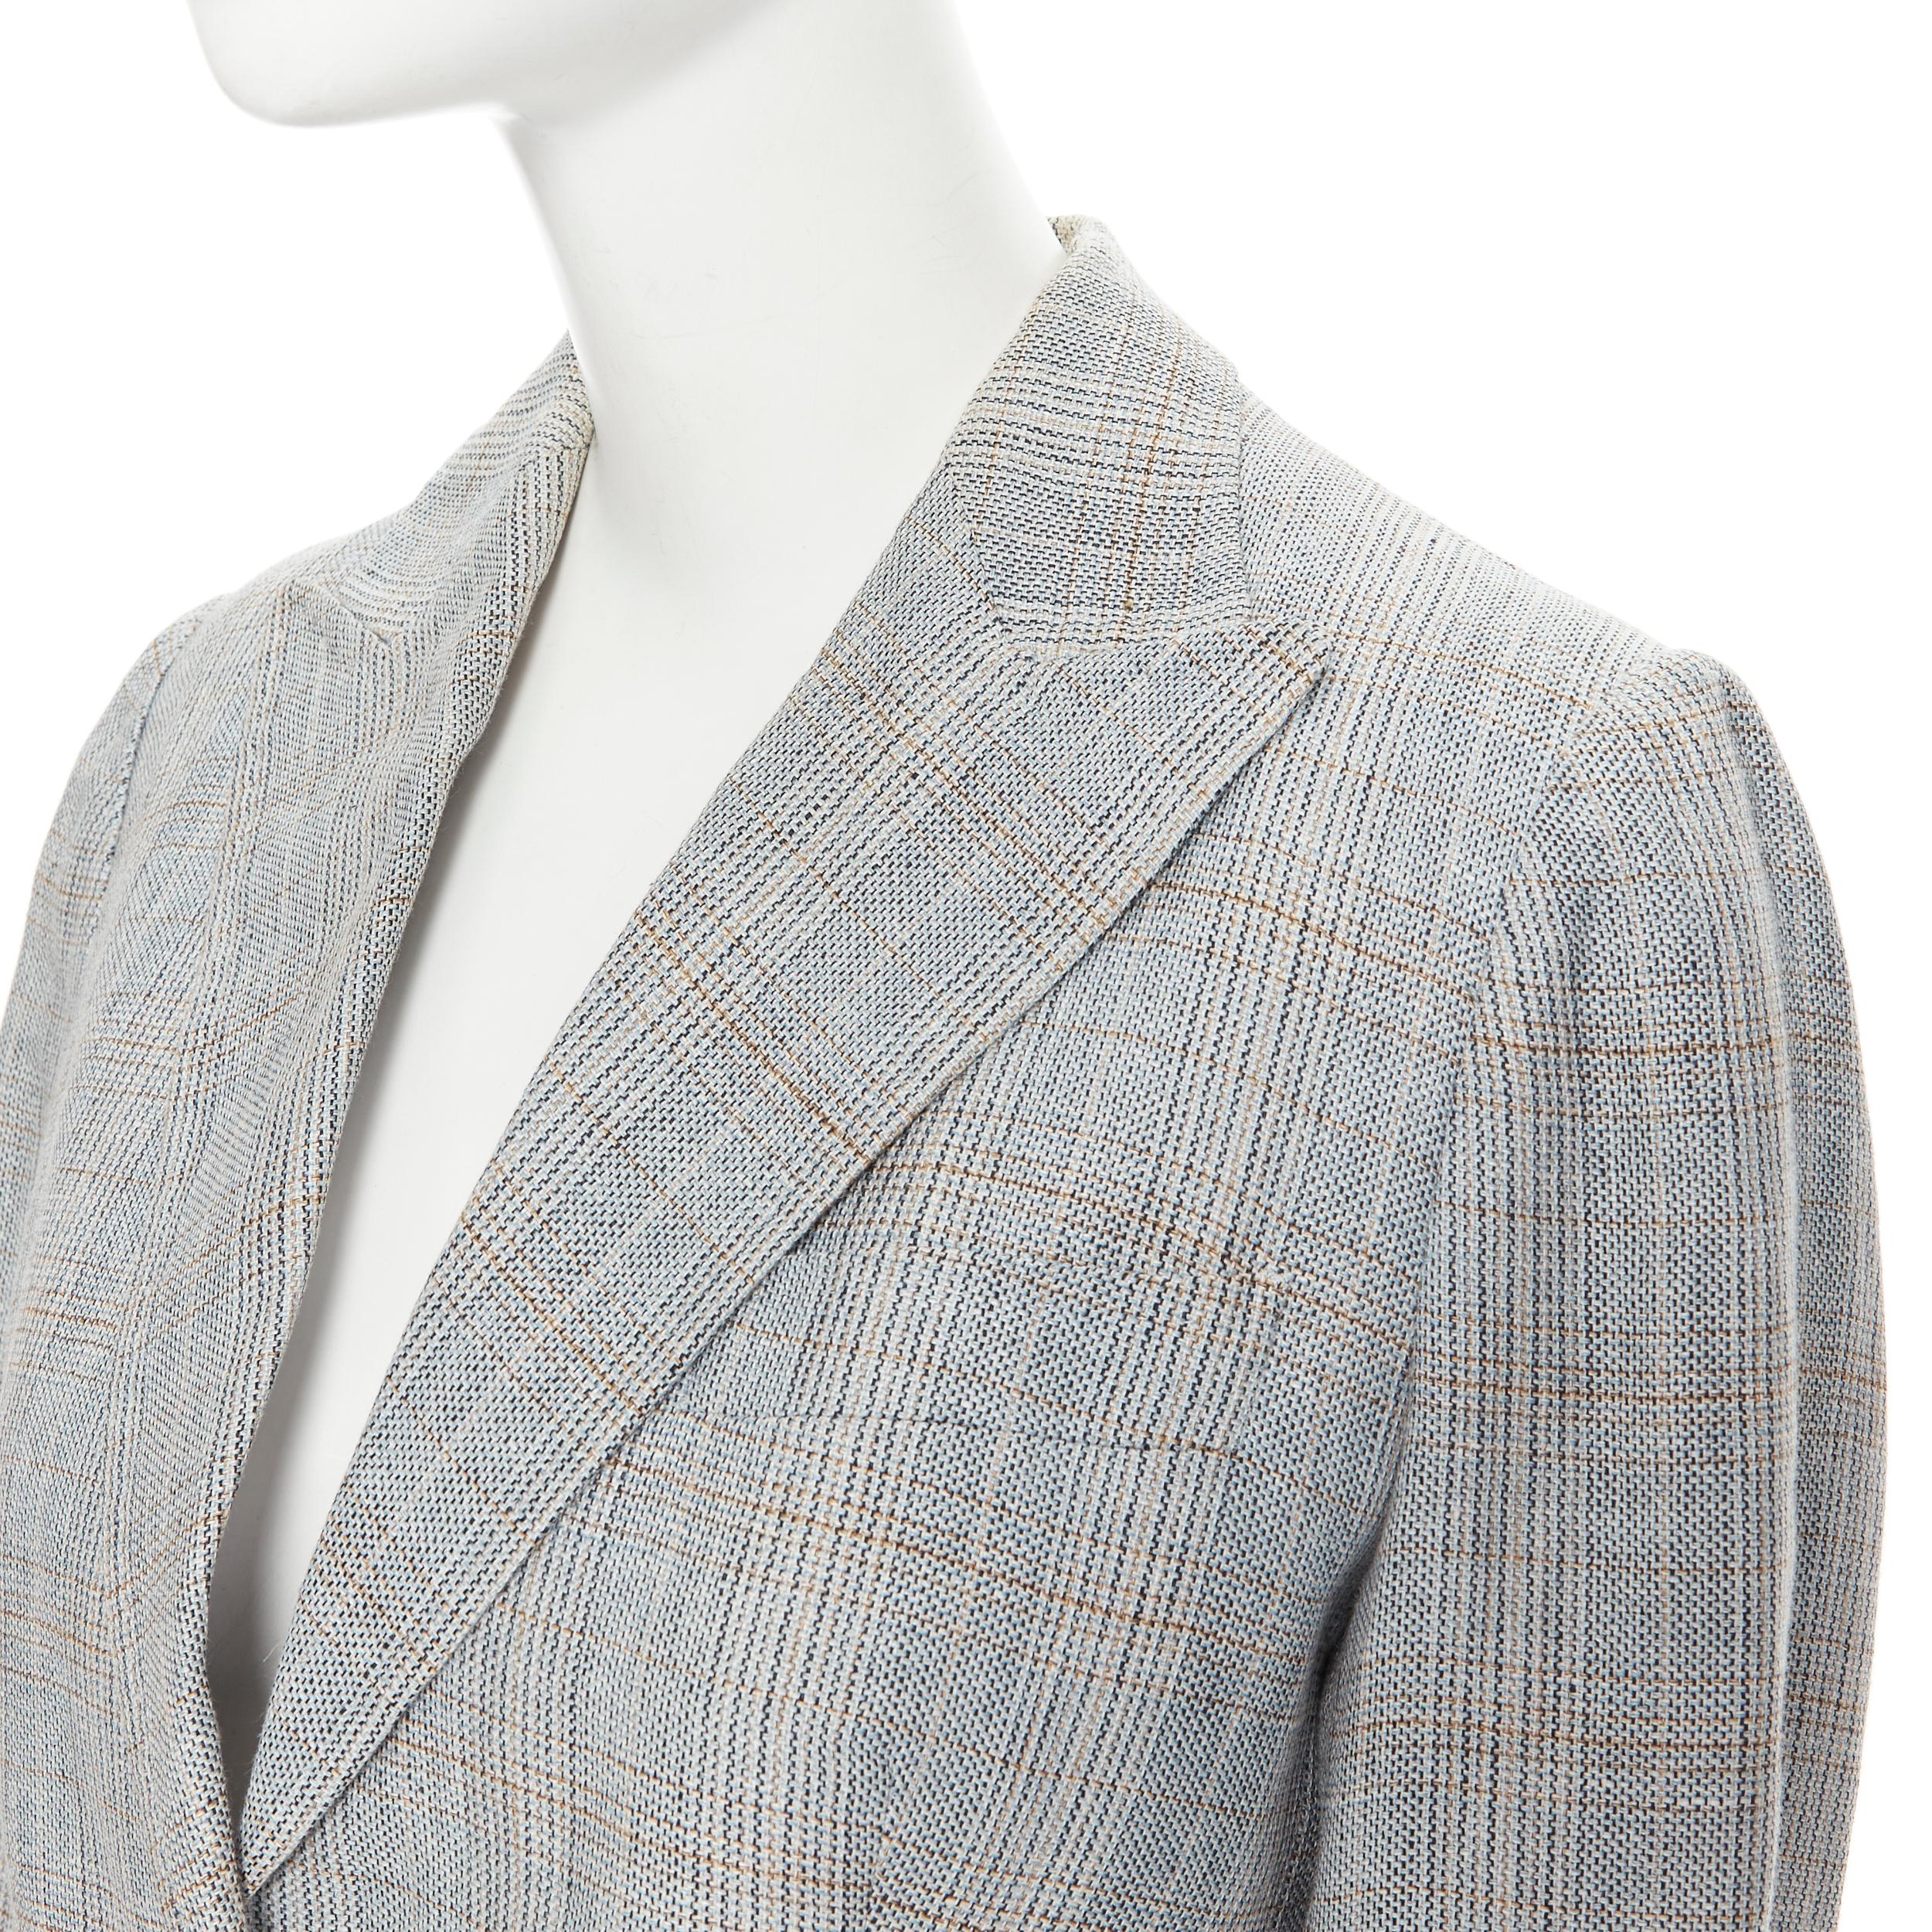 DOLCE GABBANA blue check wool tweed one button cutaway blazer pant suit IT42 M For Sale 1